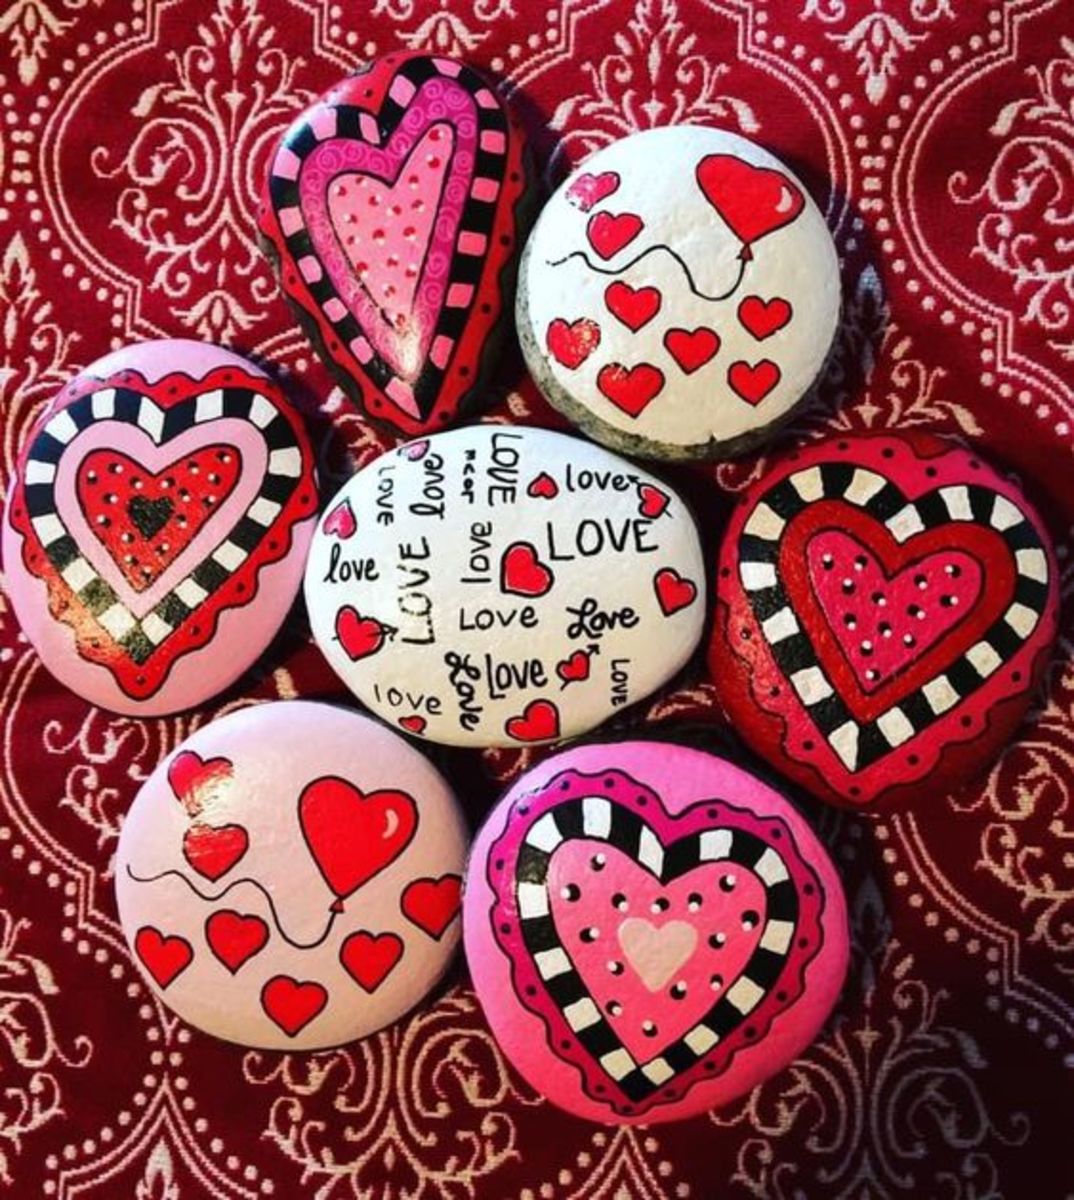 40+ Fun Valentines Crafts for Kids and Adults - HubPages